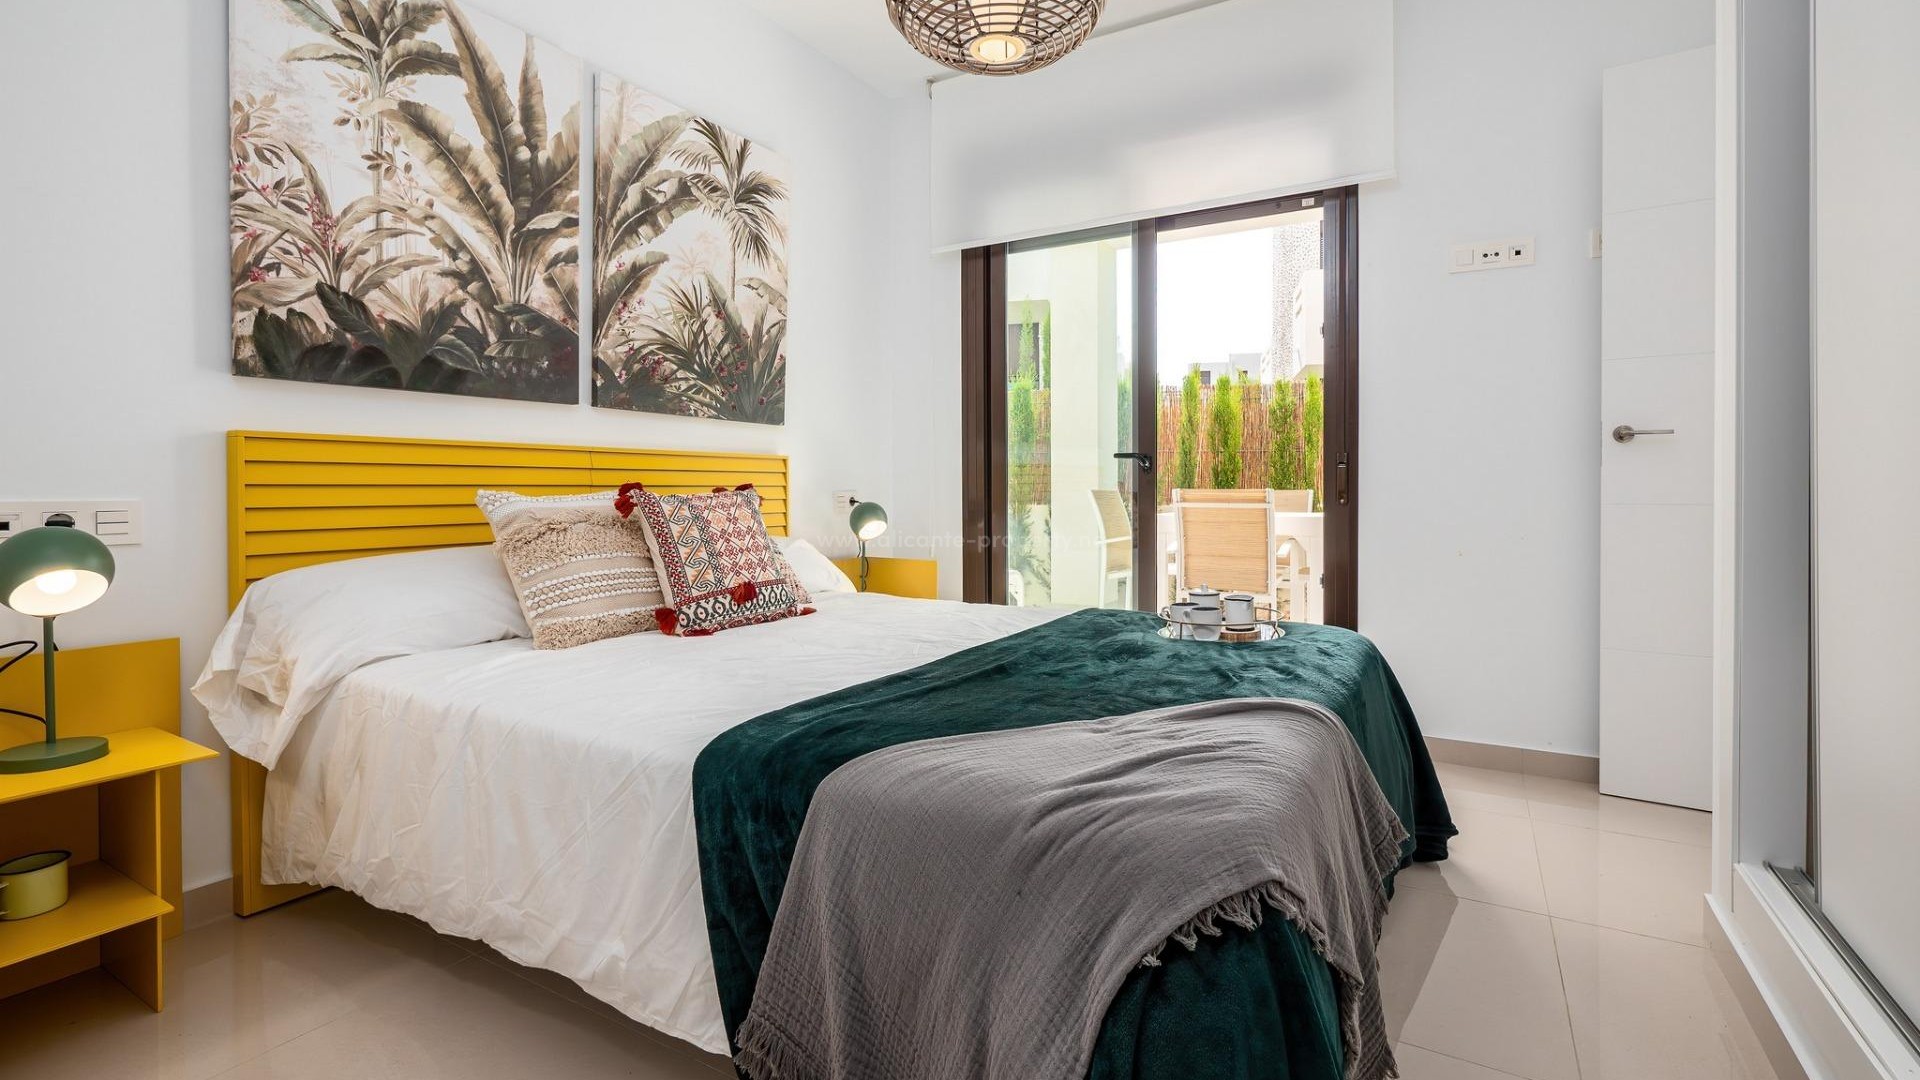 Different types of new bungalows, apartments and townhouses in La Finca Golf, 2 bedrooms and 2 bathrooms, vary with garden, terrace, solarium. Shared pool